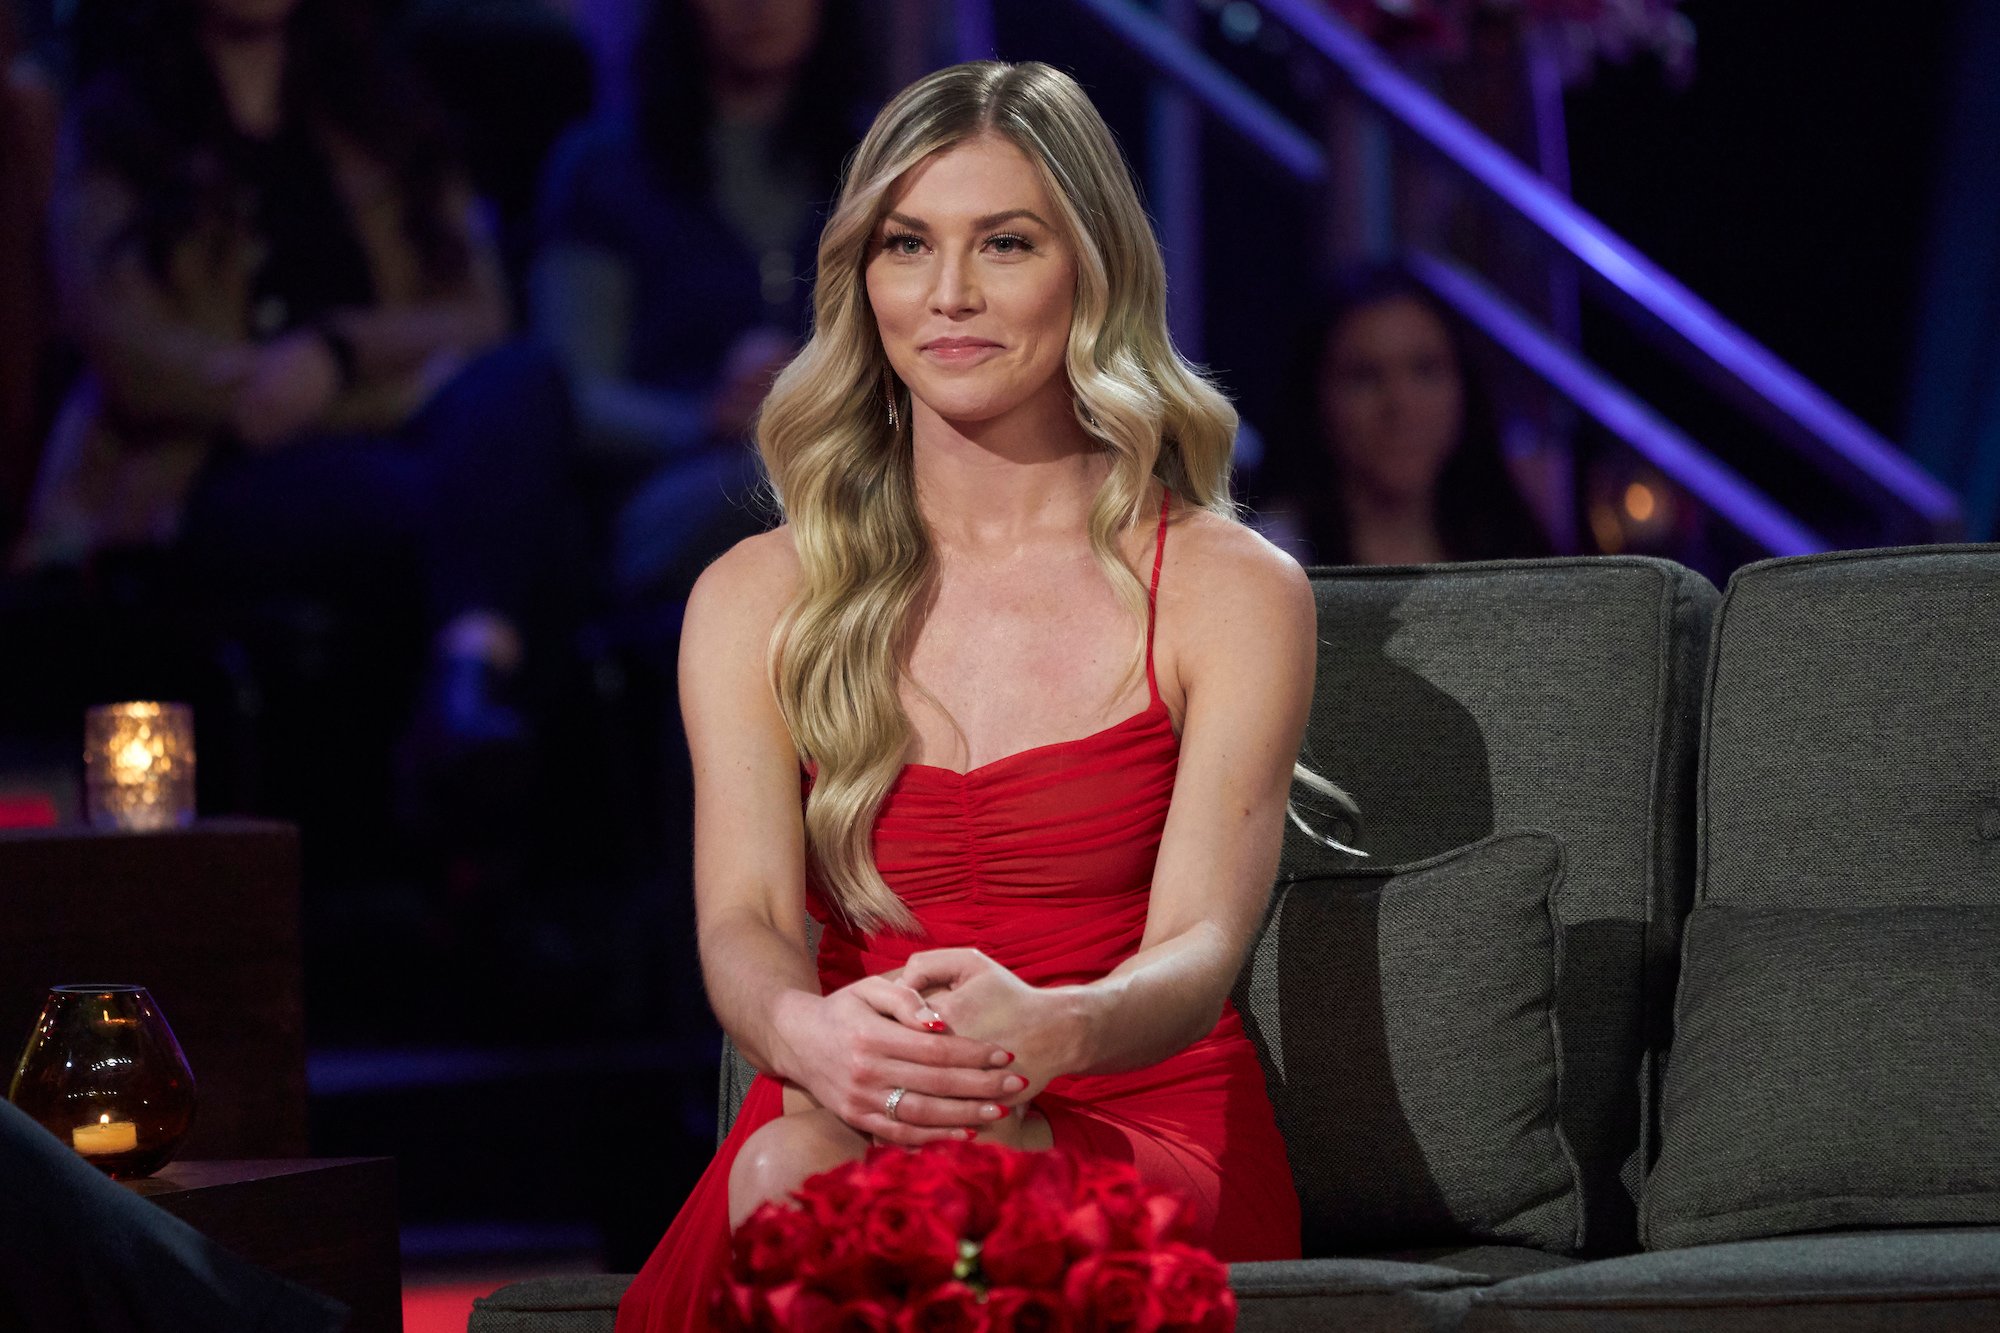 'The Bachelor' star Shanae Ankney wearing a red formal gown at the 'Women Tell All'